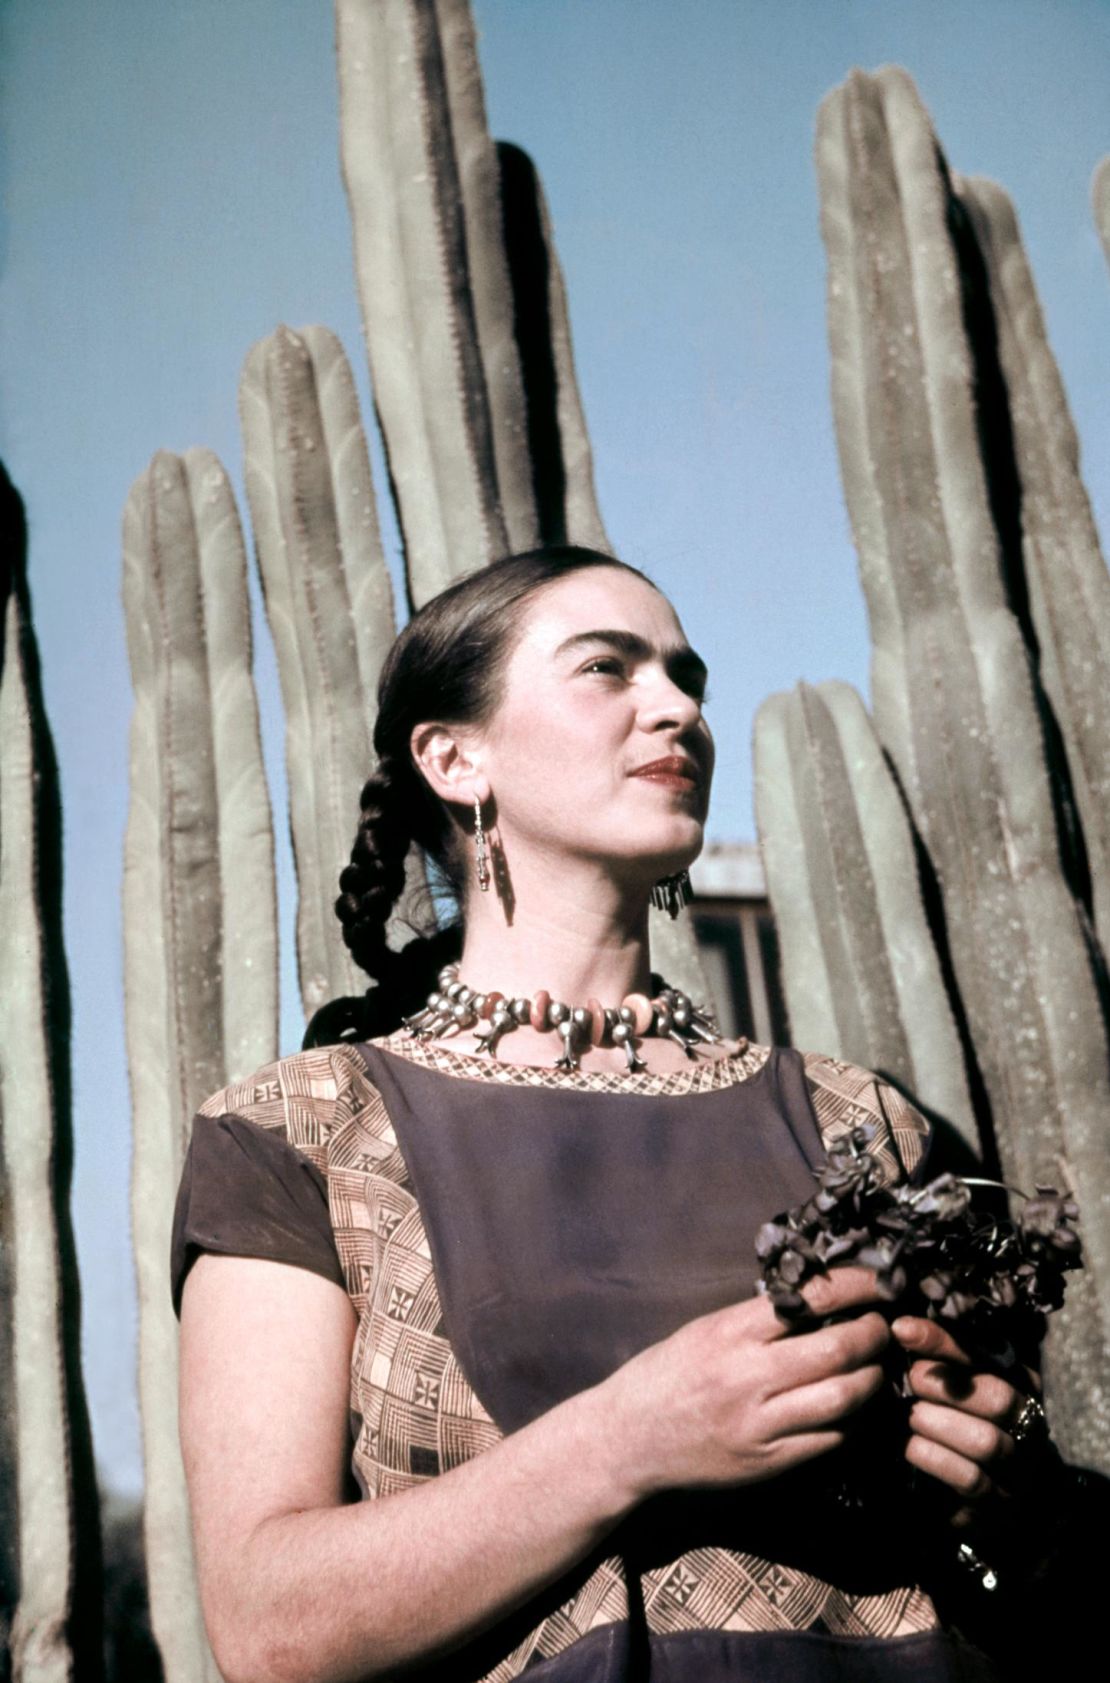 How Frida Kahlo's fashions brought Mexican politics to the world stage